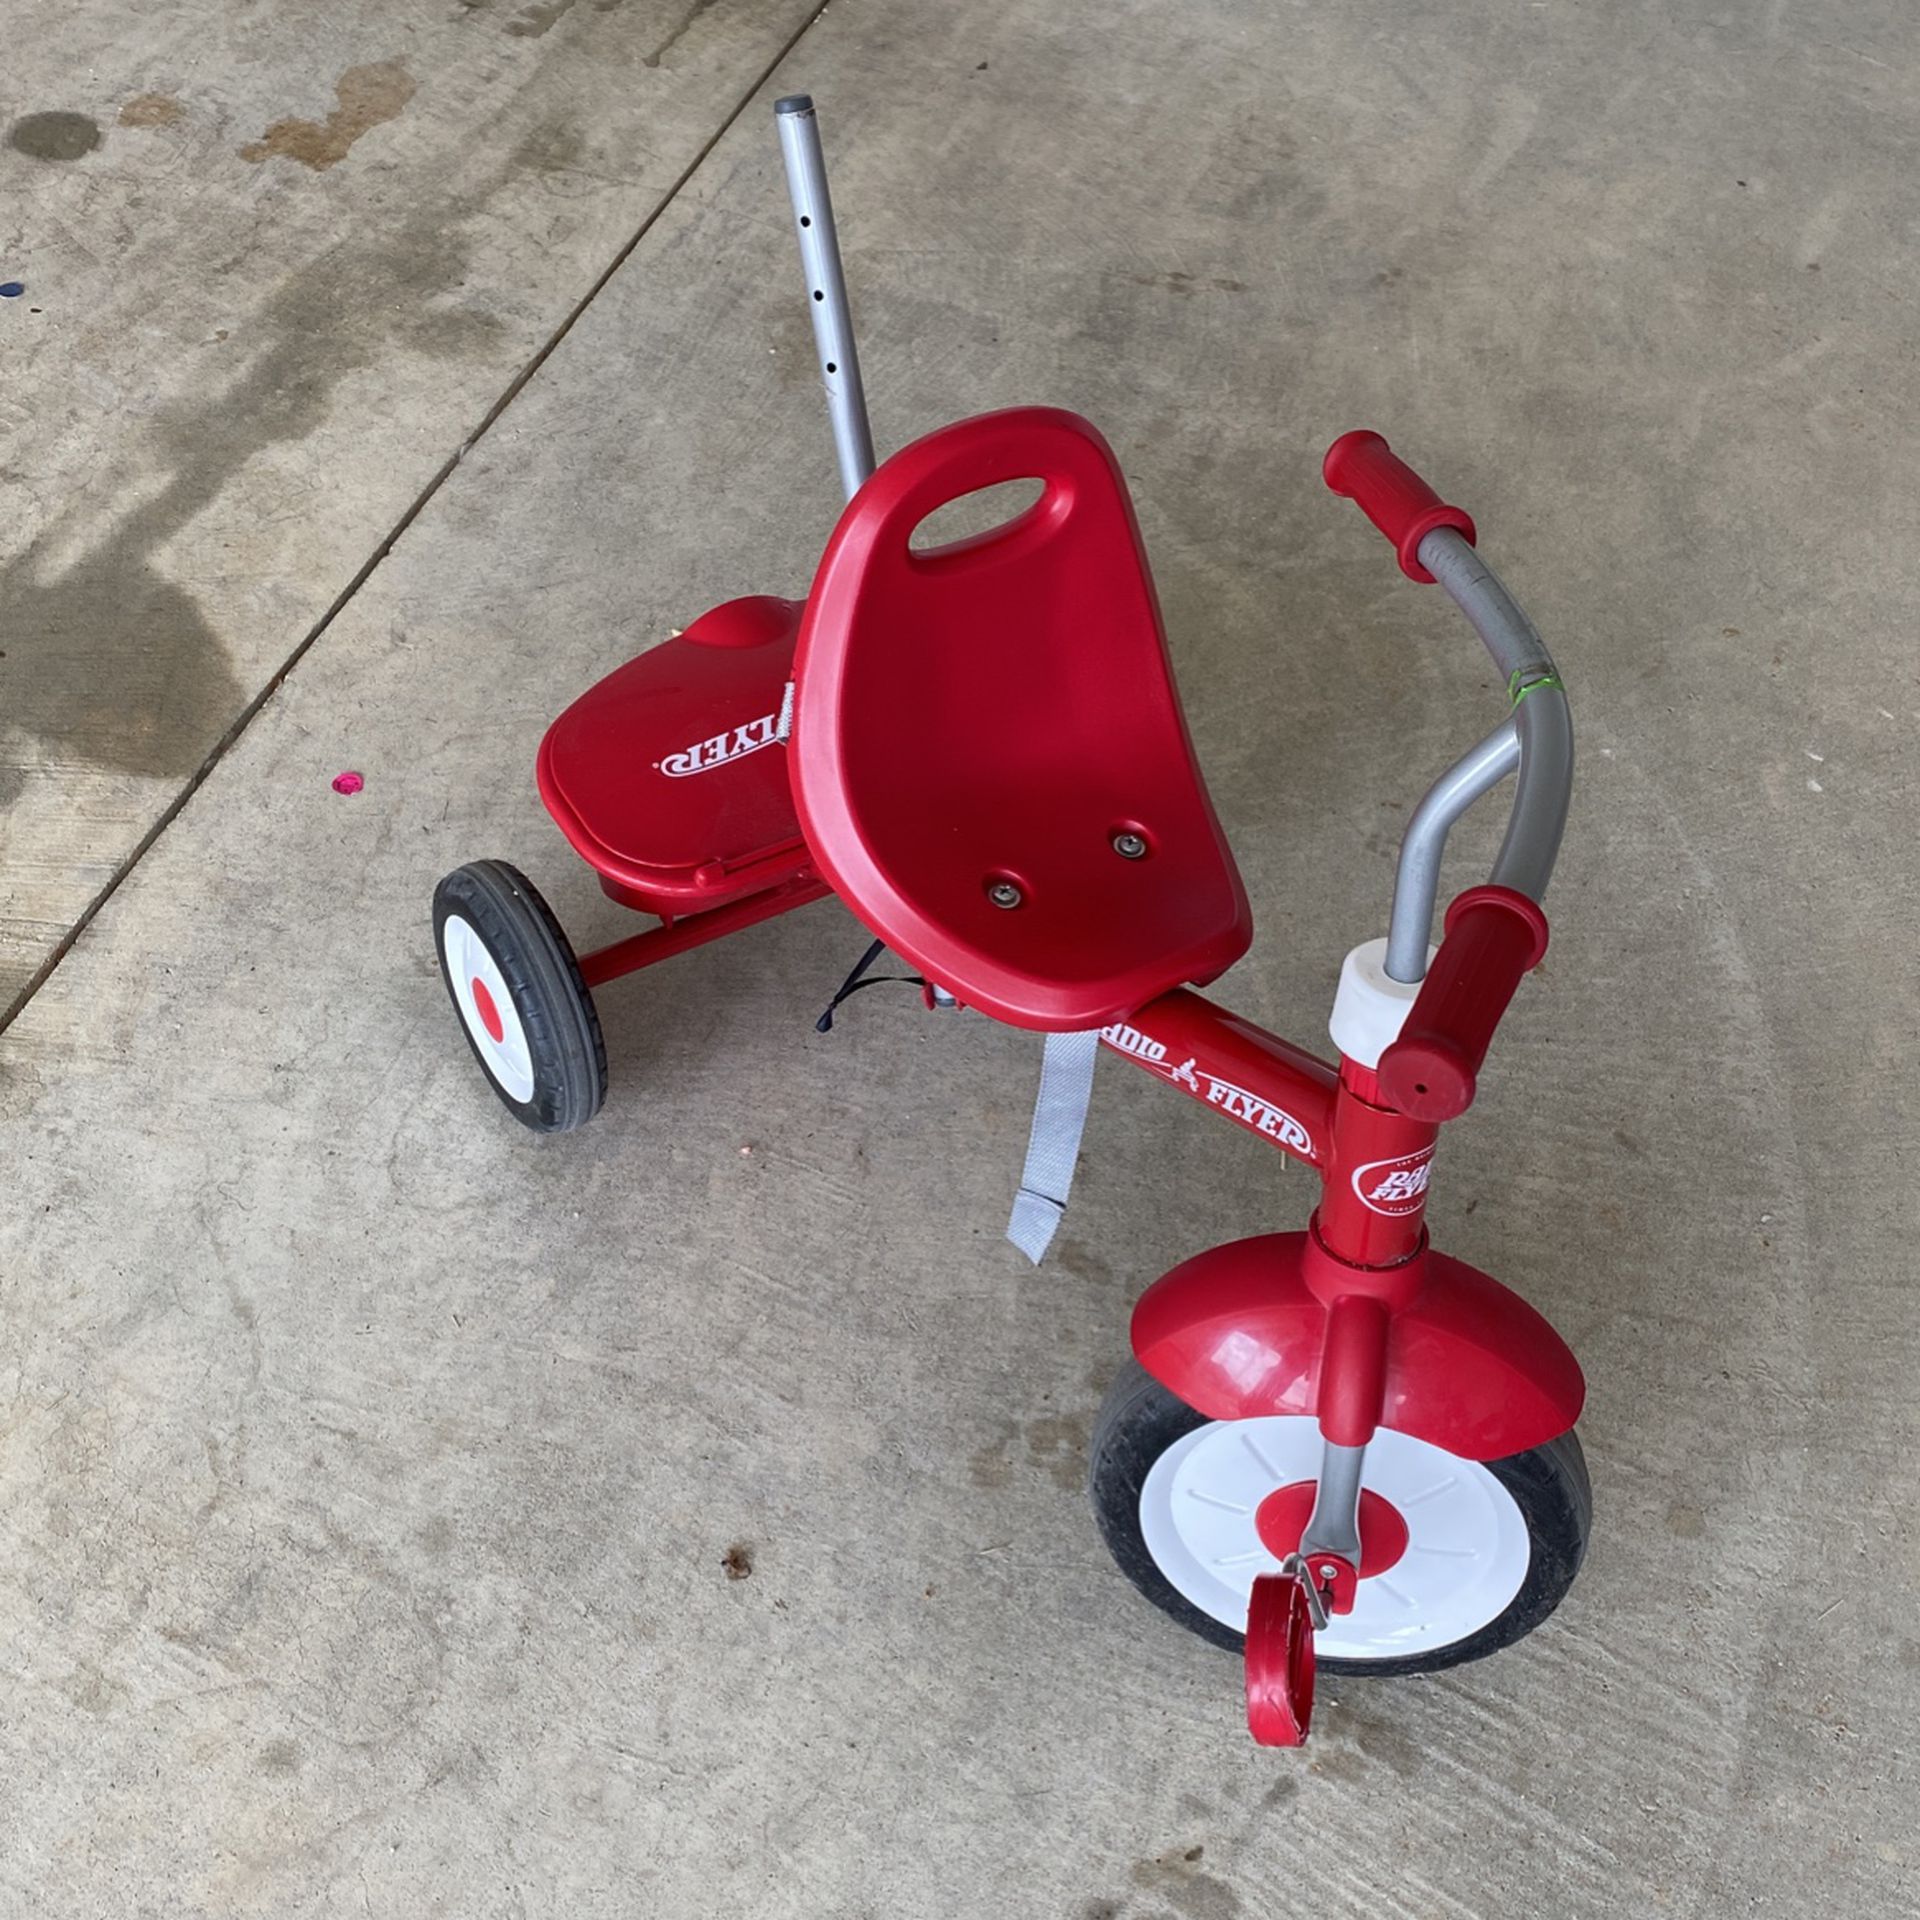 Tricycle $10